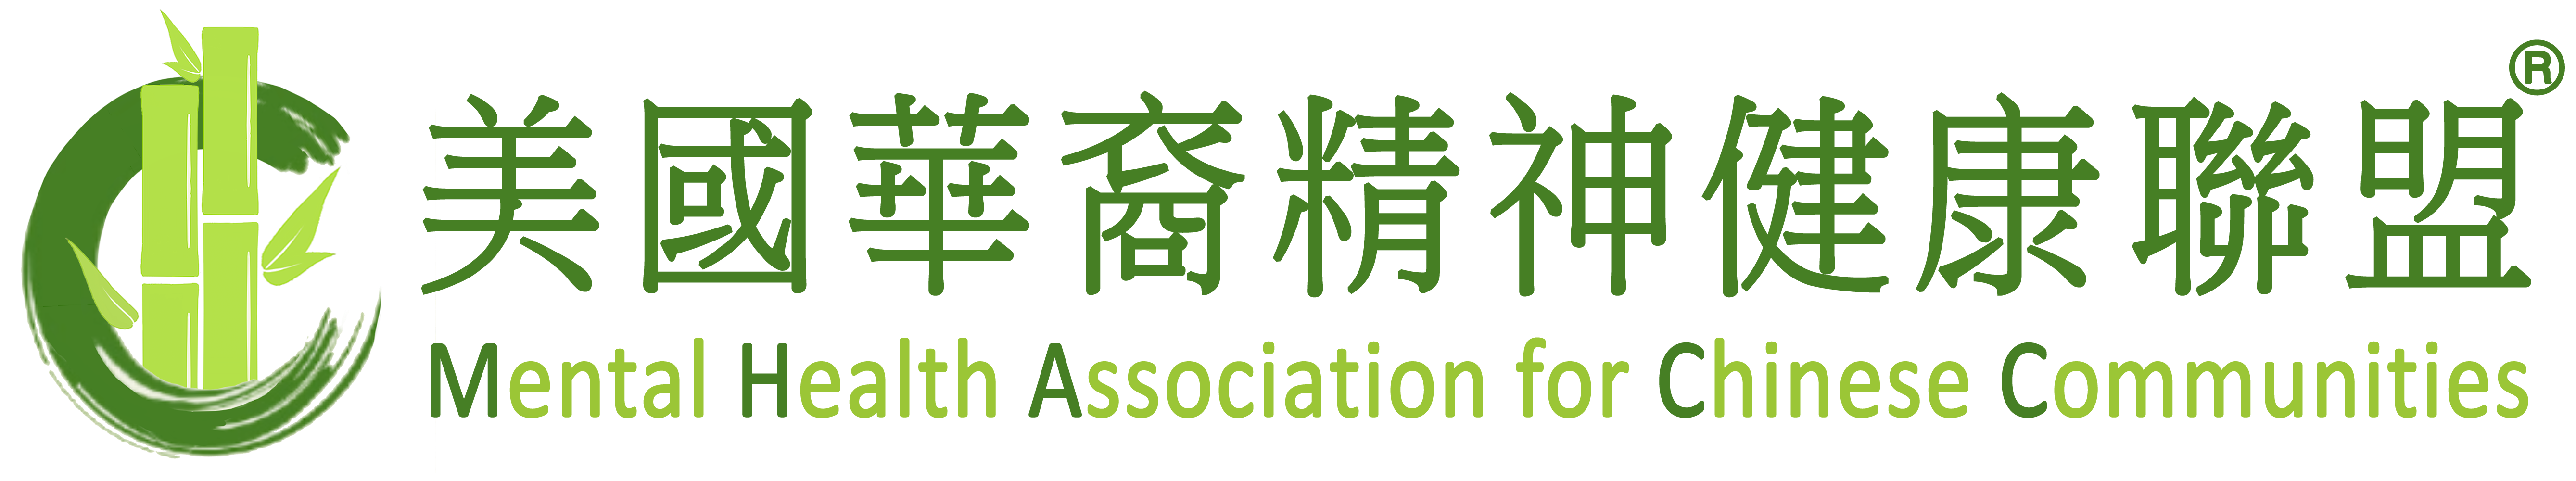 Mental Health Association for Chinese Communities